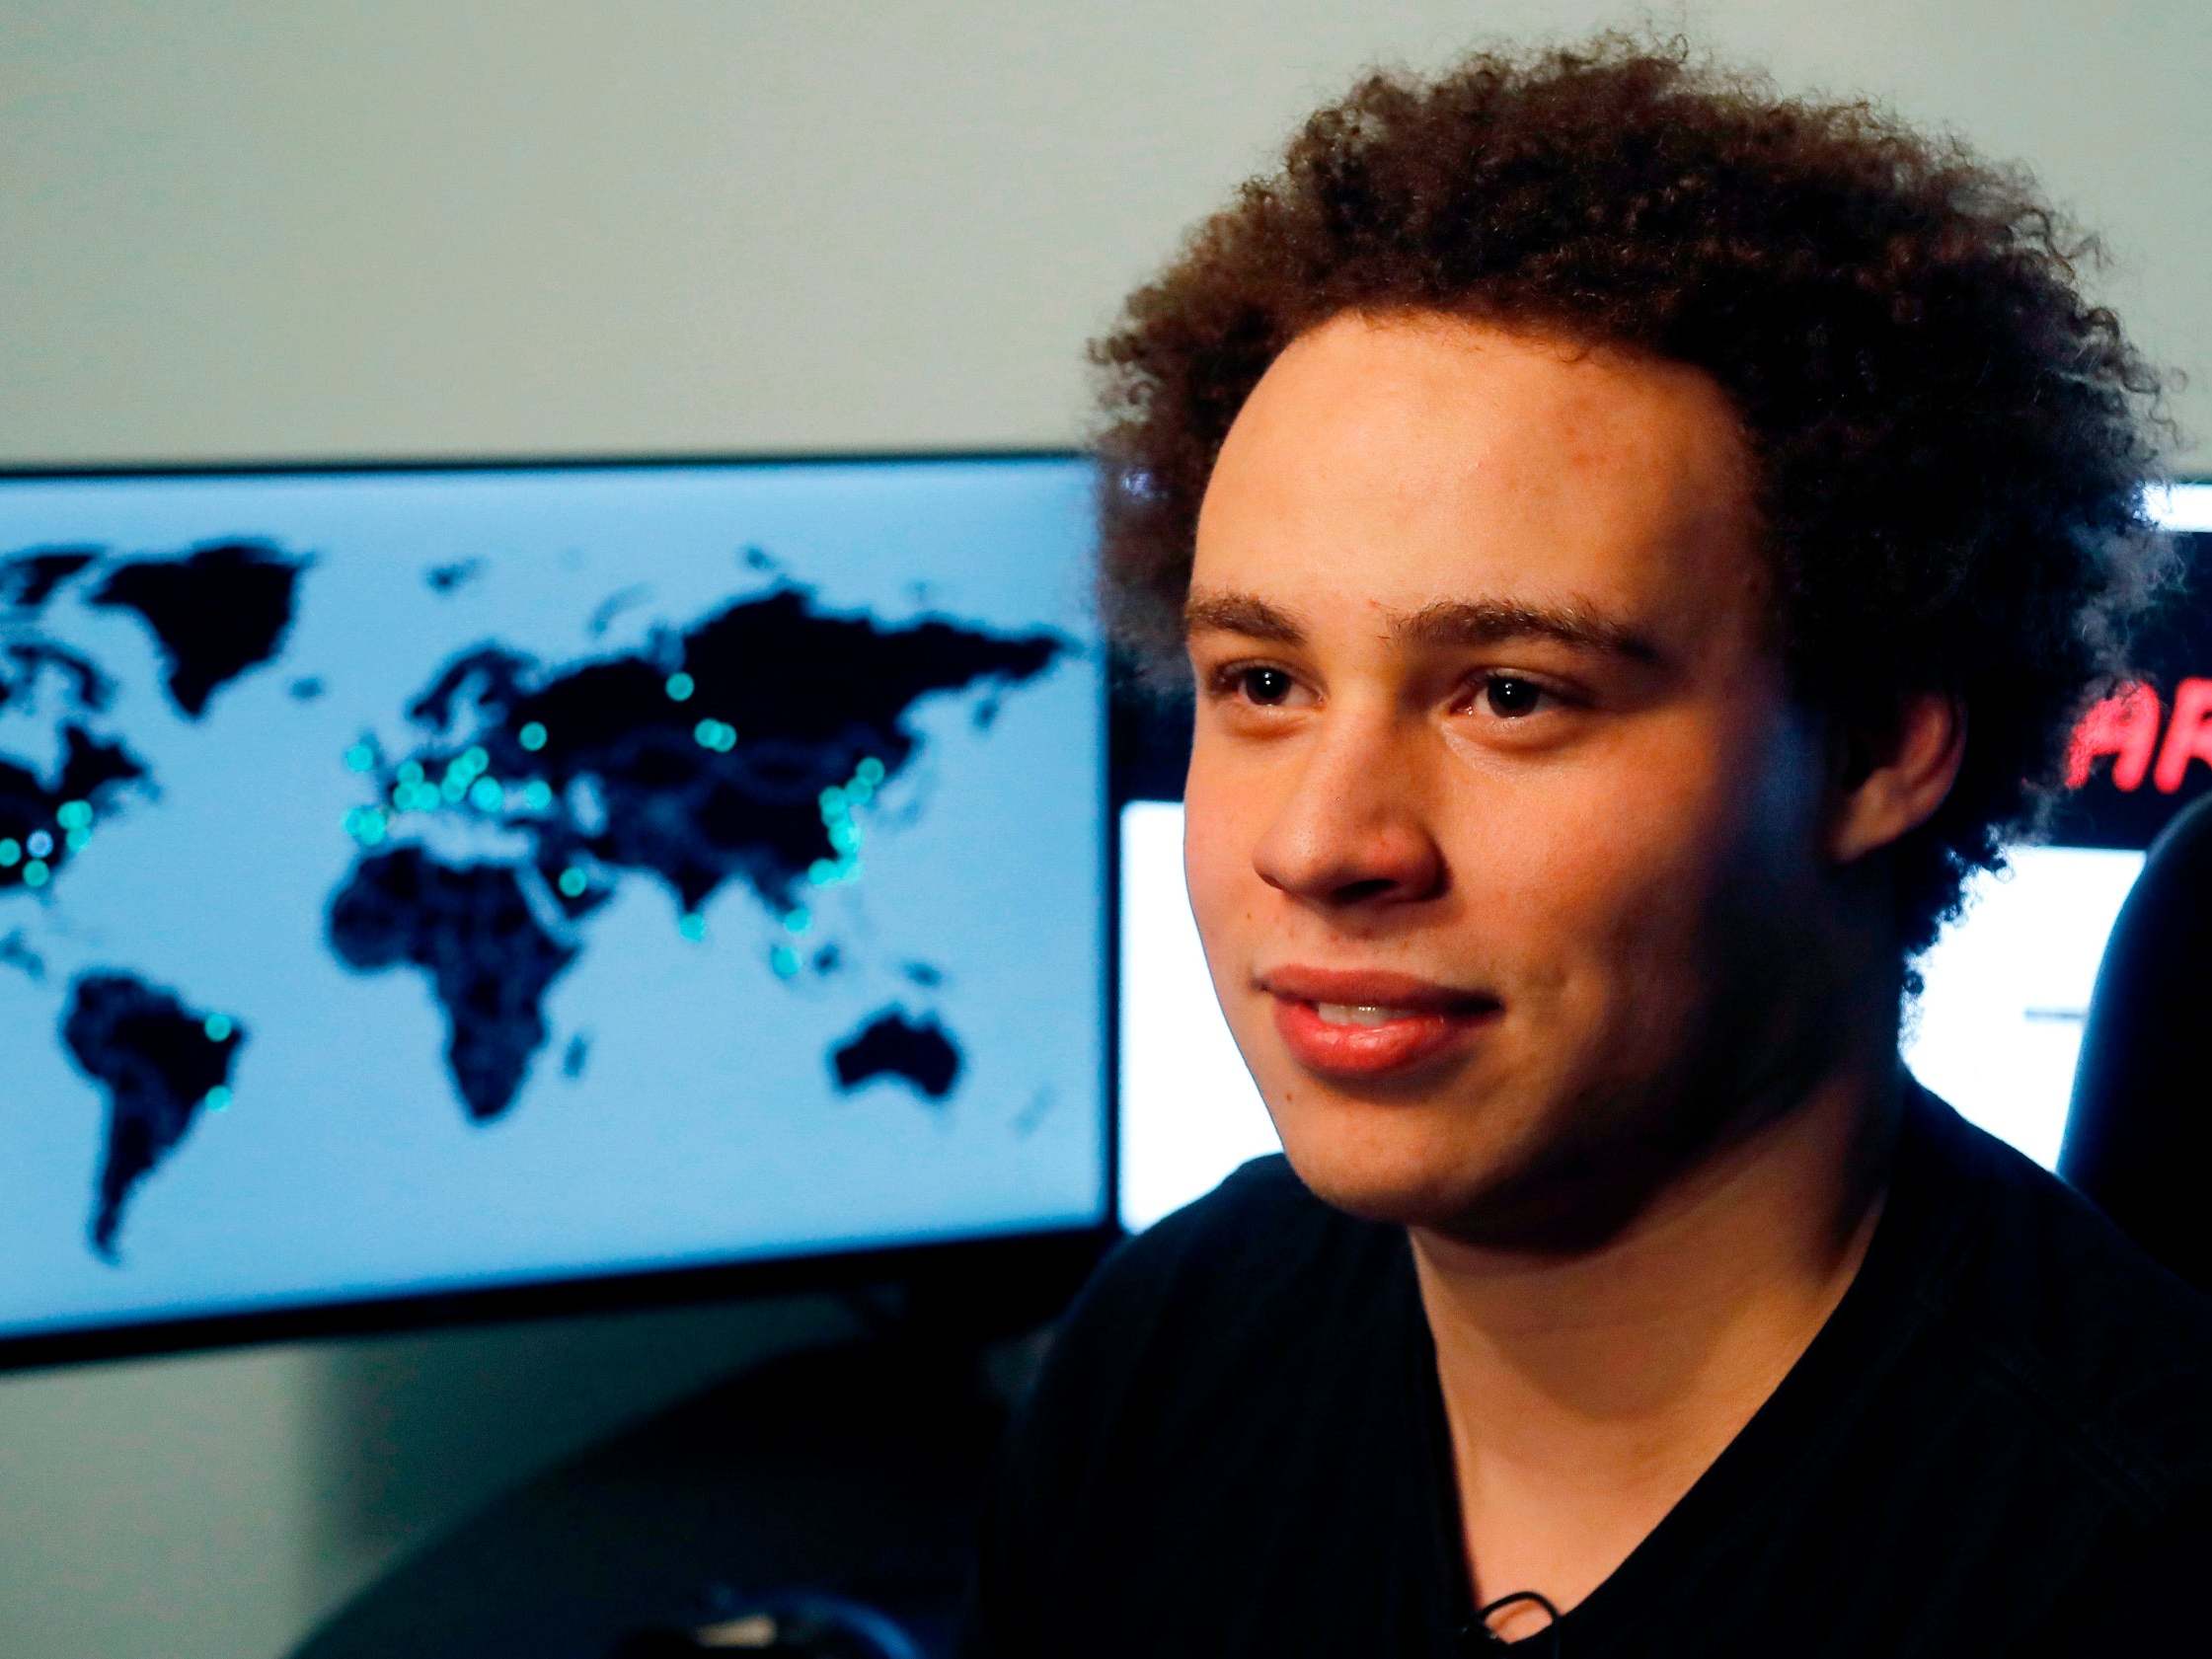 Marcus Hutchins was spared jail over malware charges for his role in combatting WannaCry virus